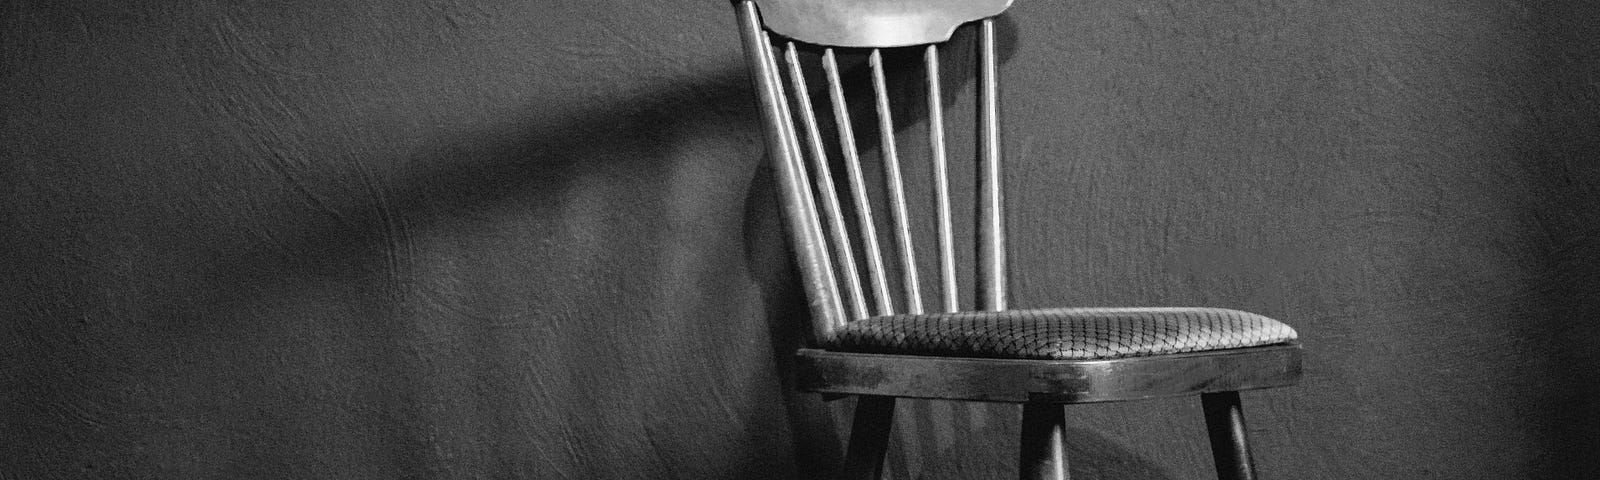 Empty small wooden chair against plain wall.